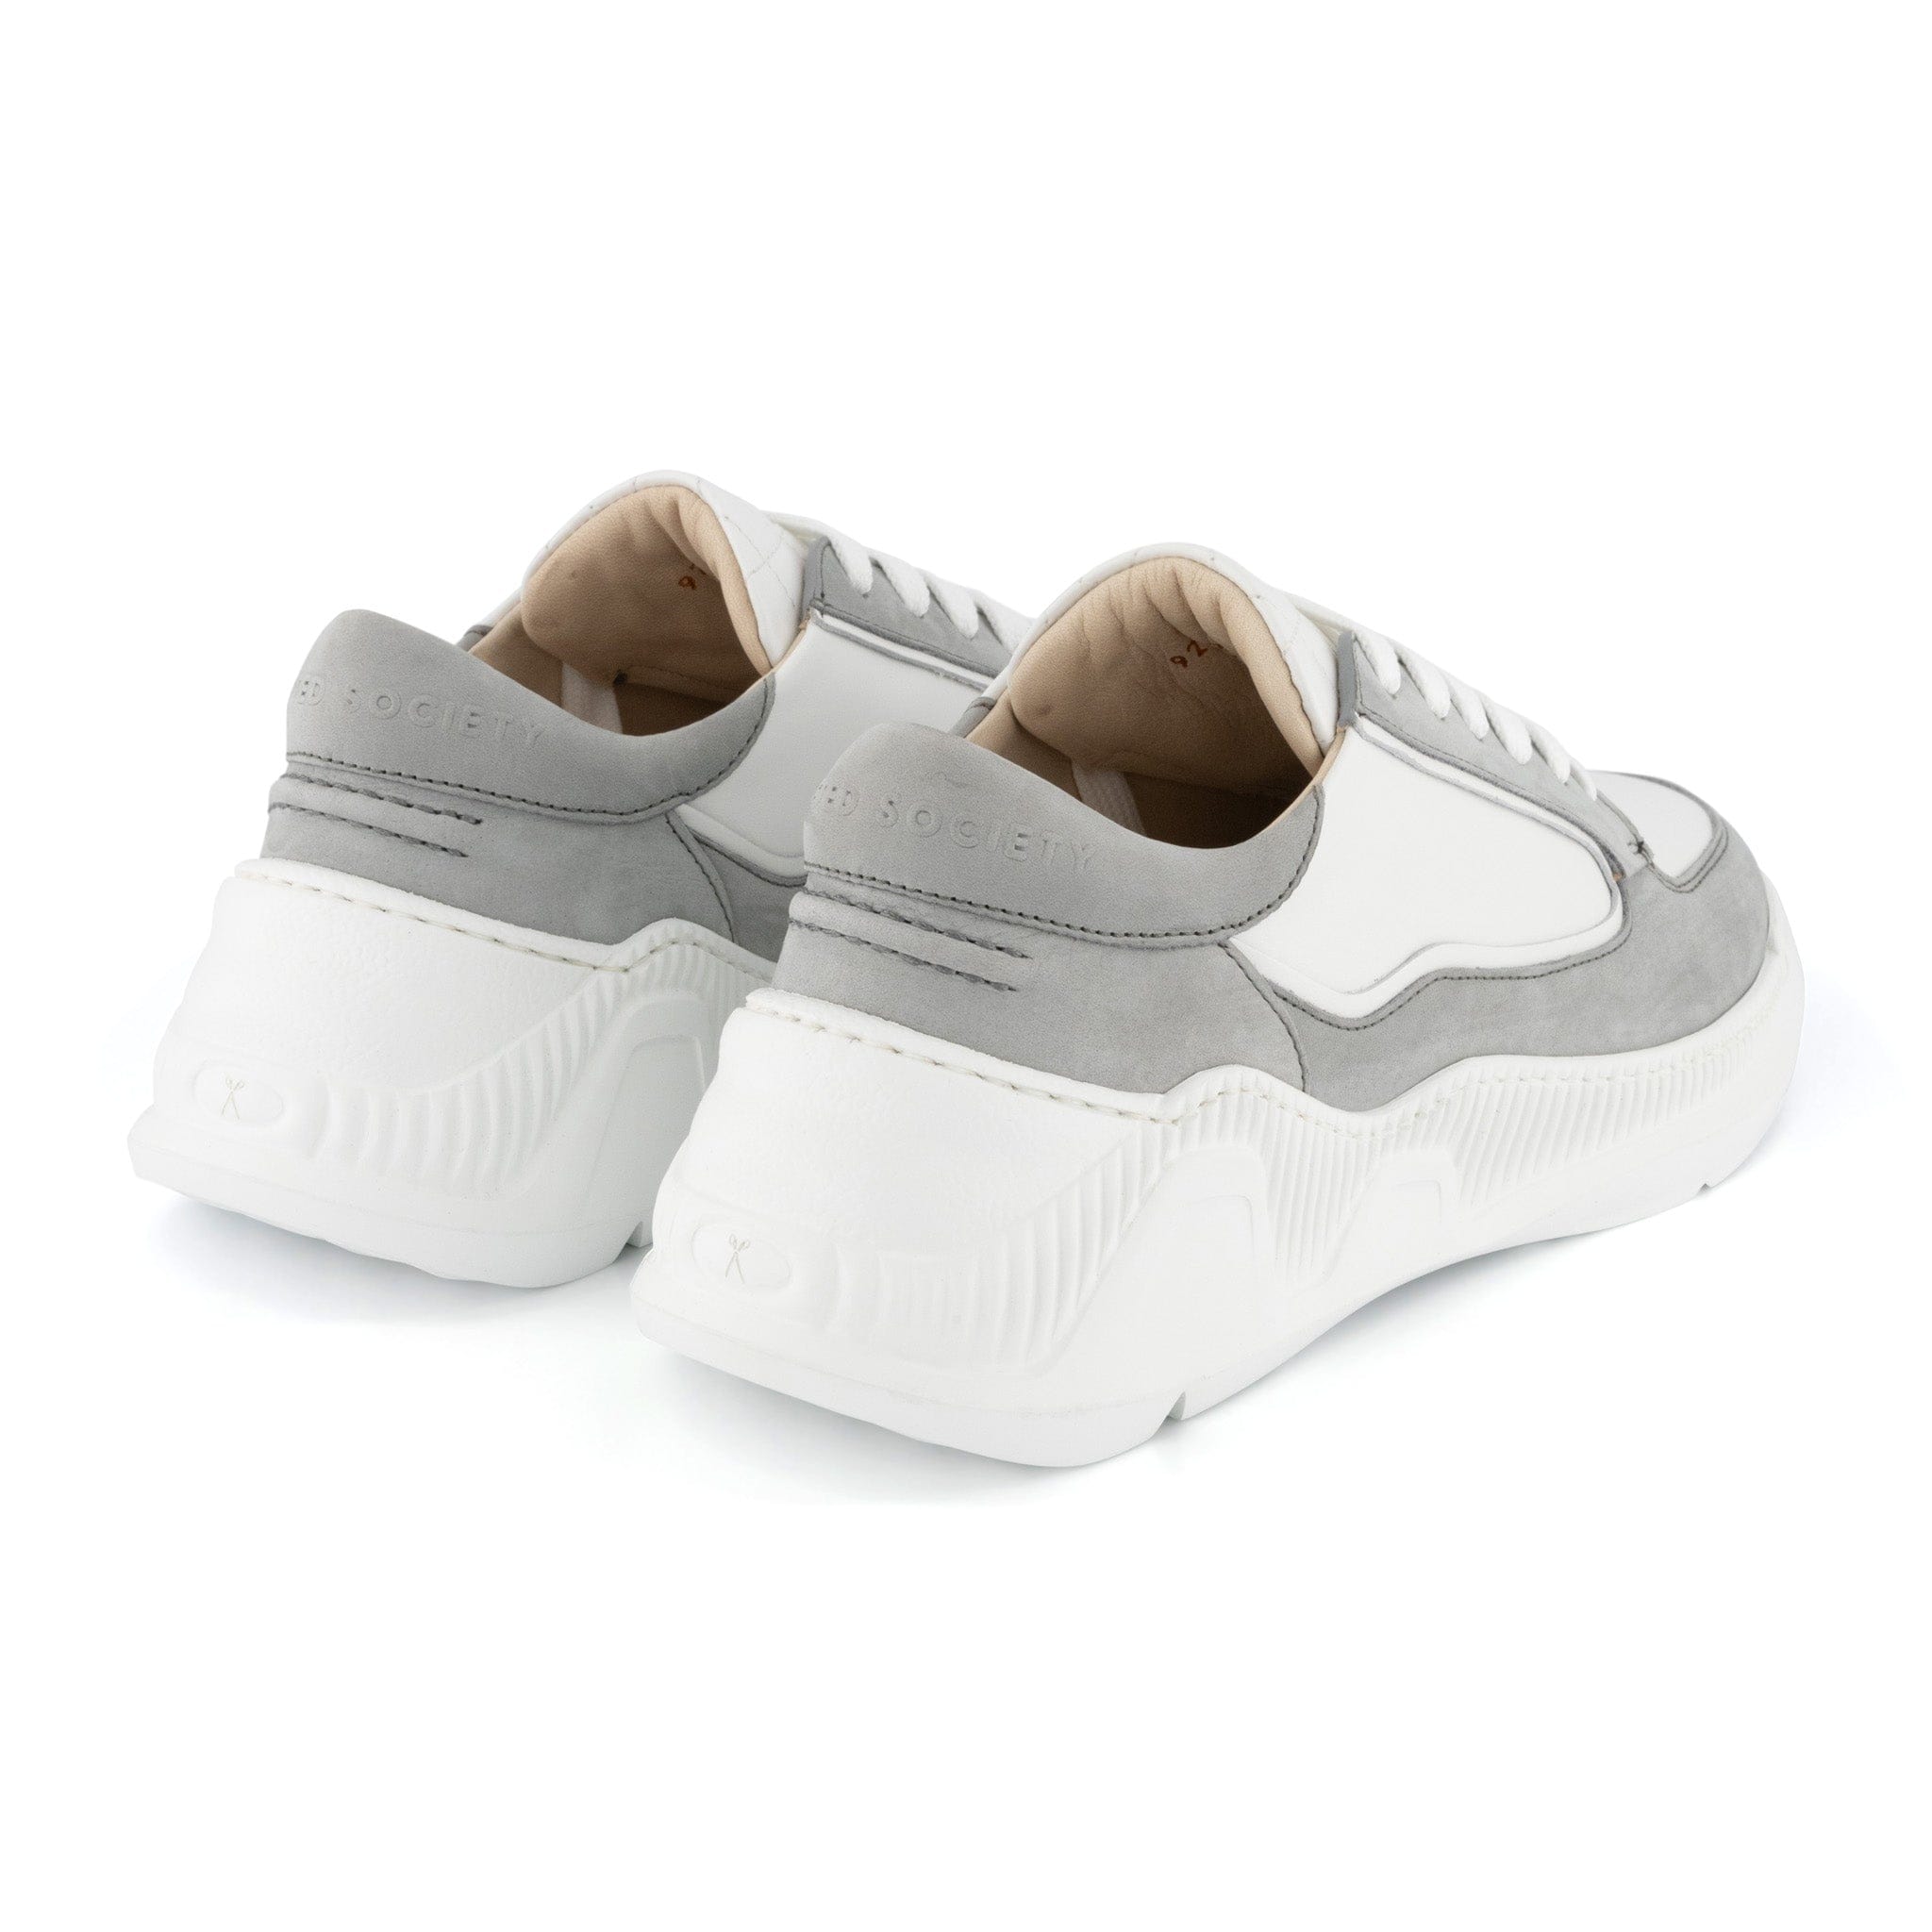 Nesto Low Top Italian Leather Sneaker | Light Grey and White | Made in Italy